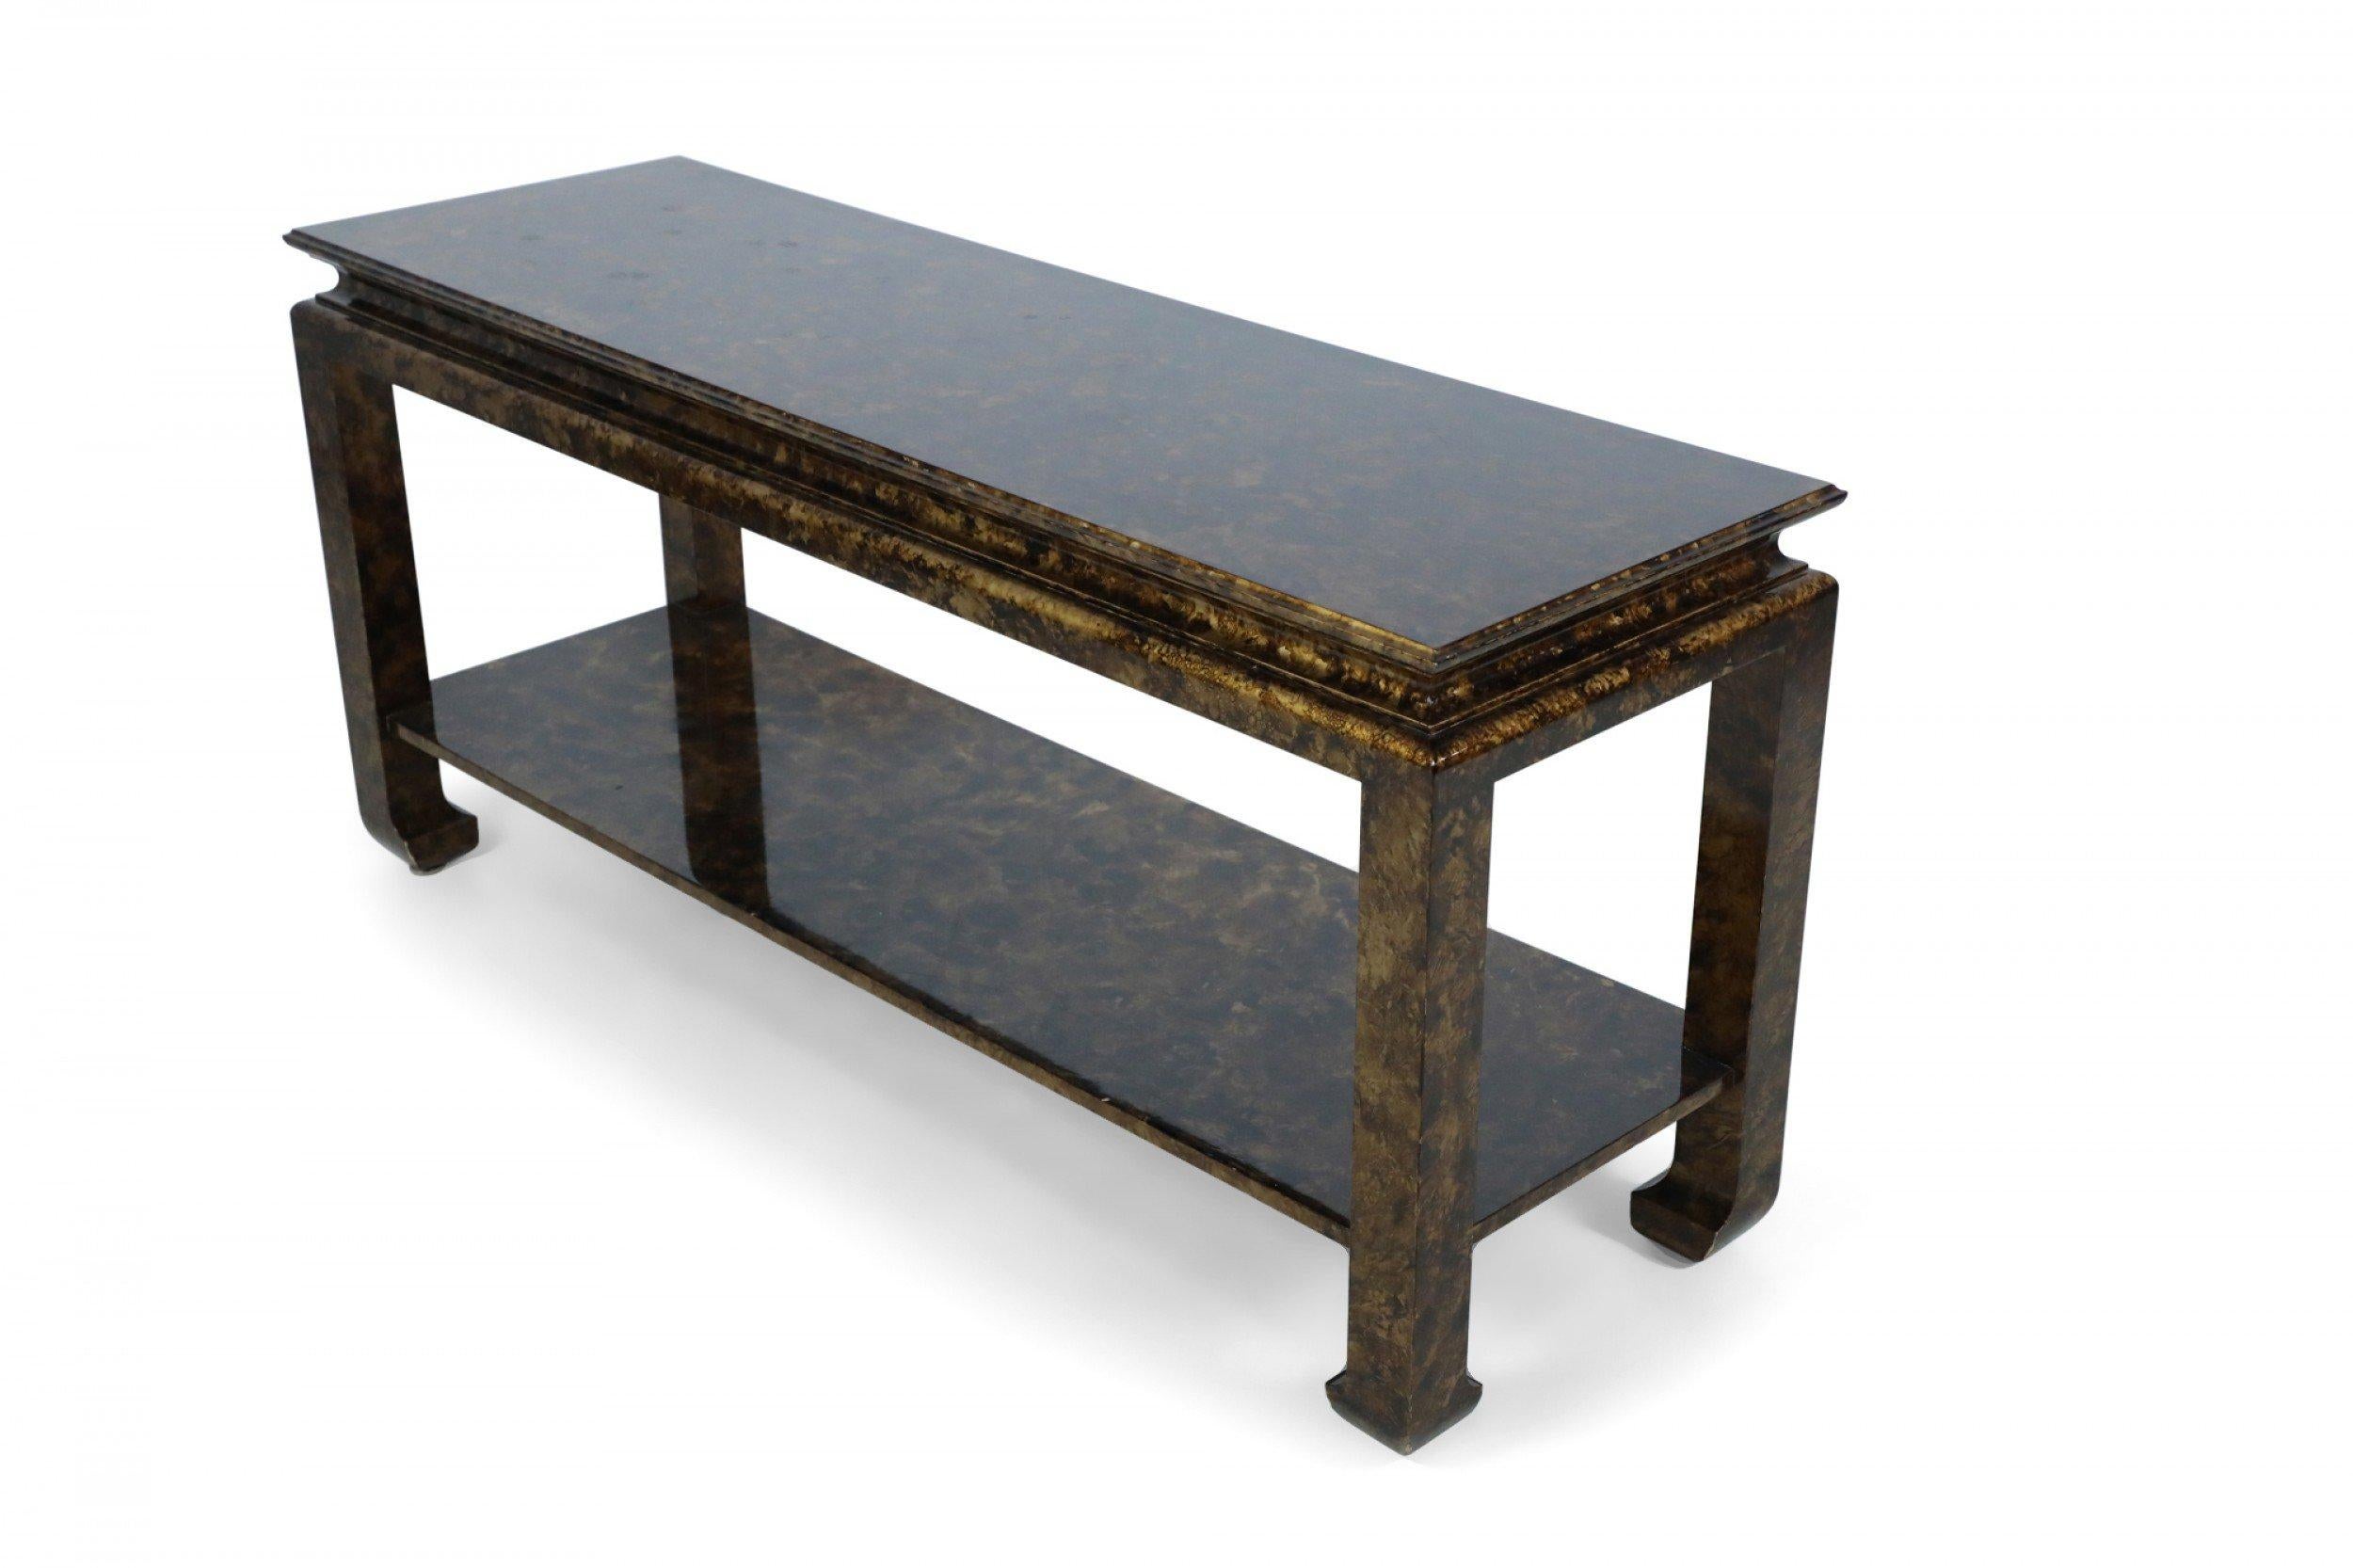 Mid-century chinoiserie style rectangular console table with a faux tortoise shell veneer, high gloss lacquered finish, and lower shelf.